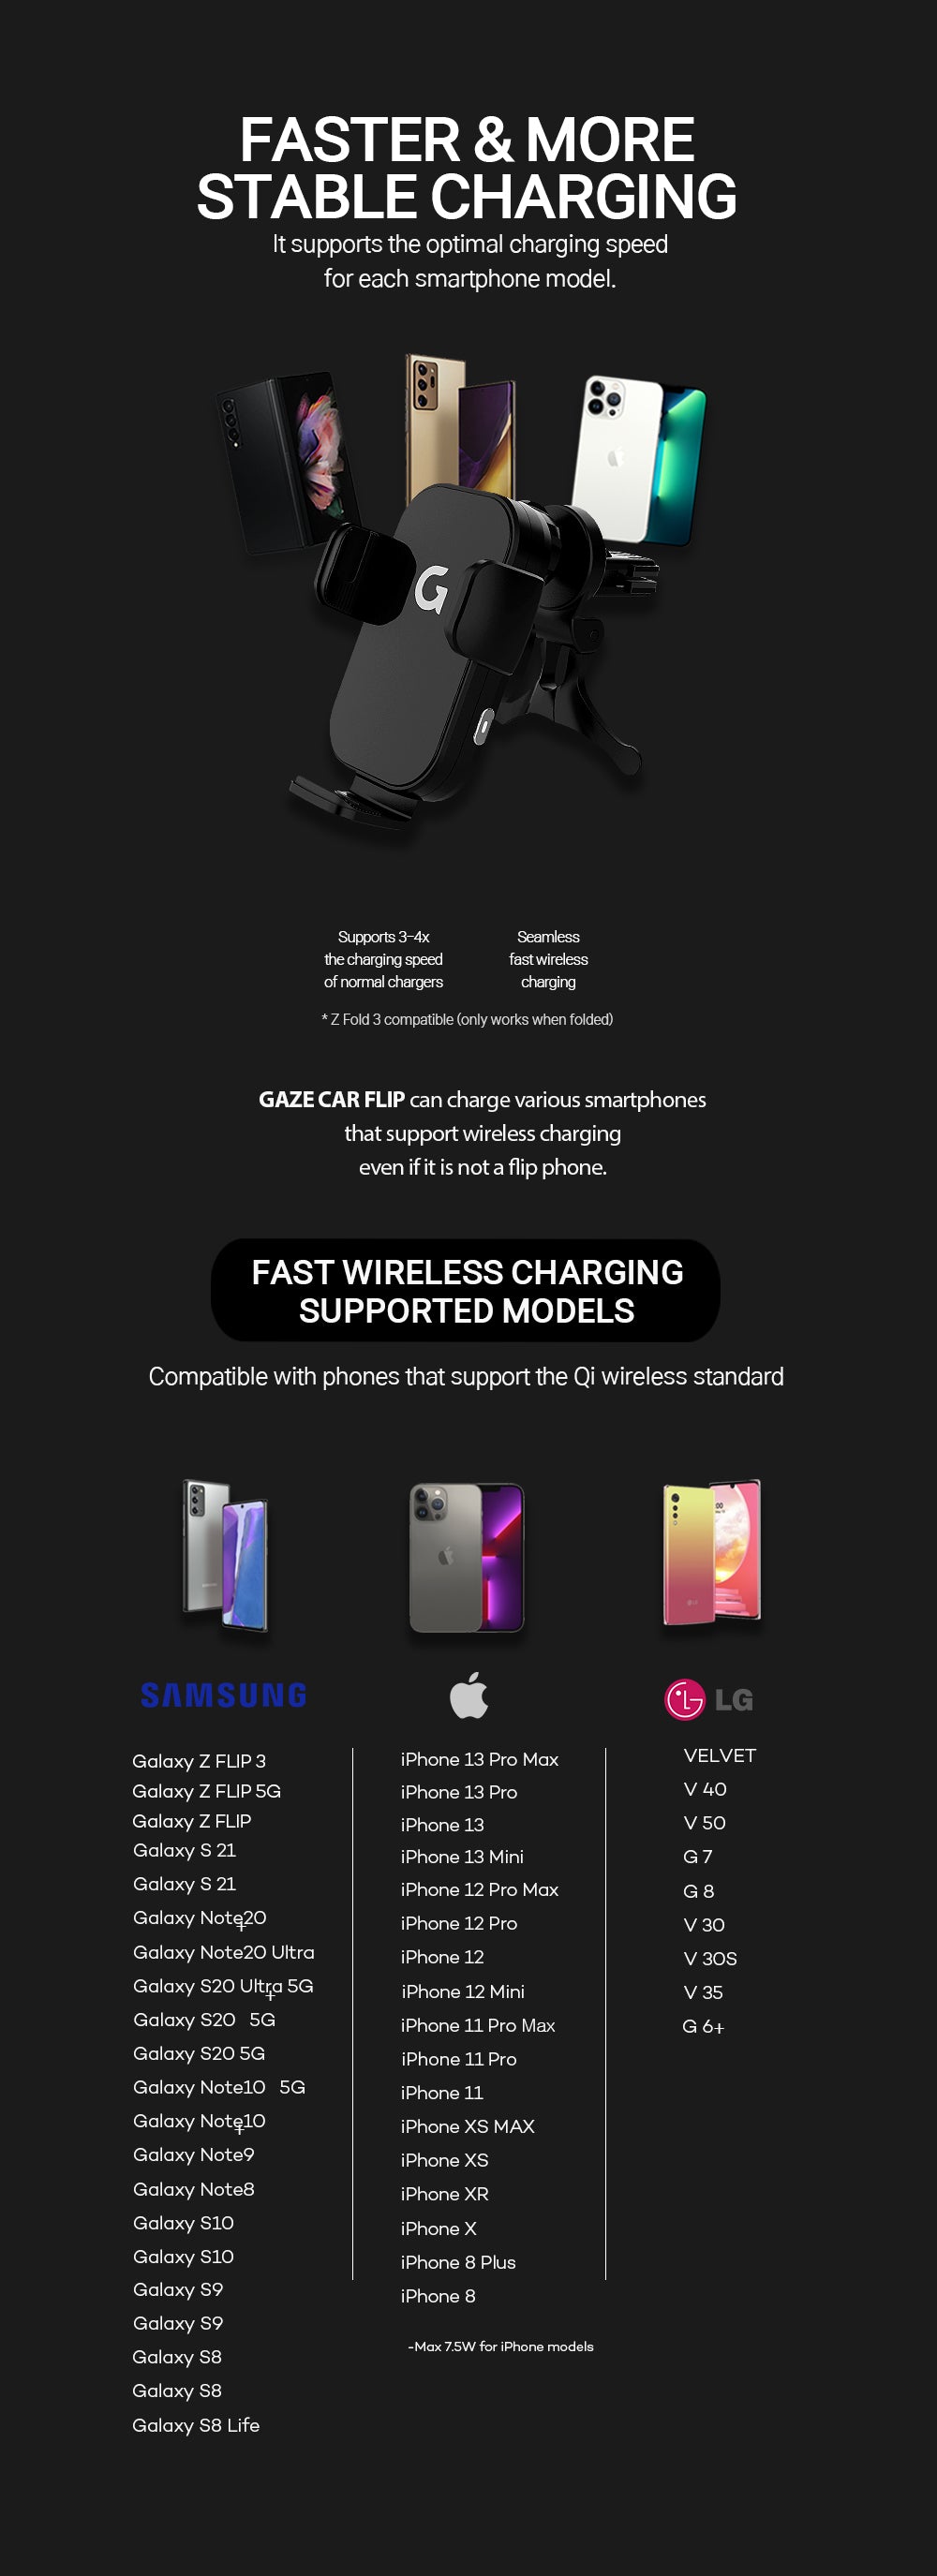 Supports all Qi-standard smartphones, and has wide range of compatibility. 15W fast charging available.